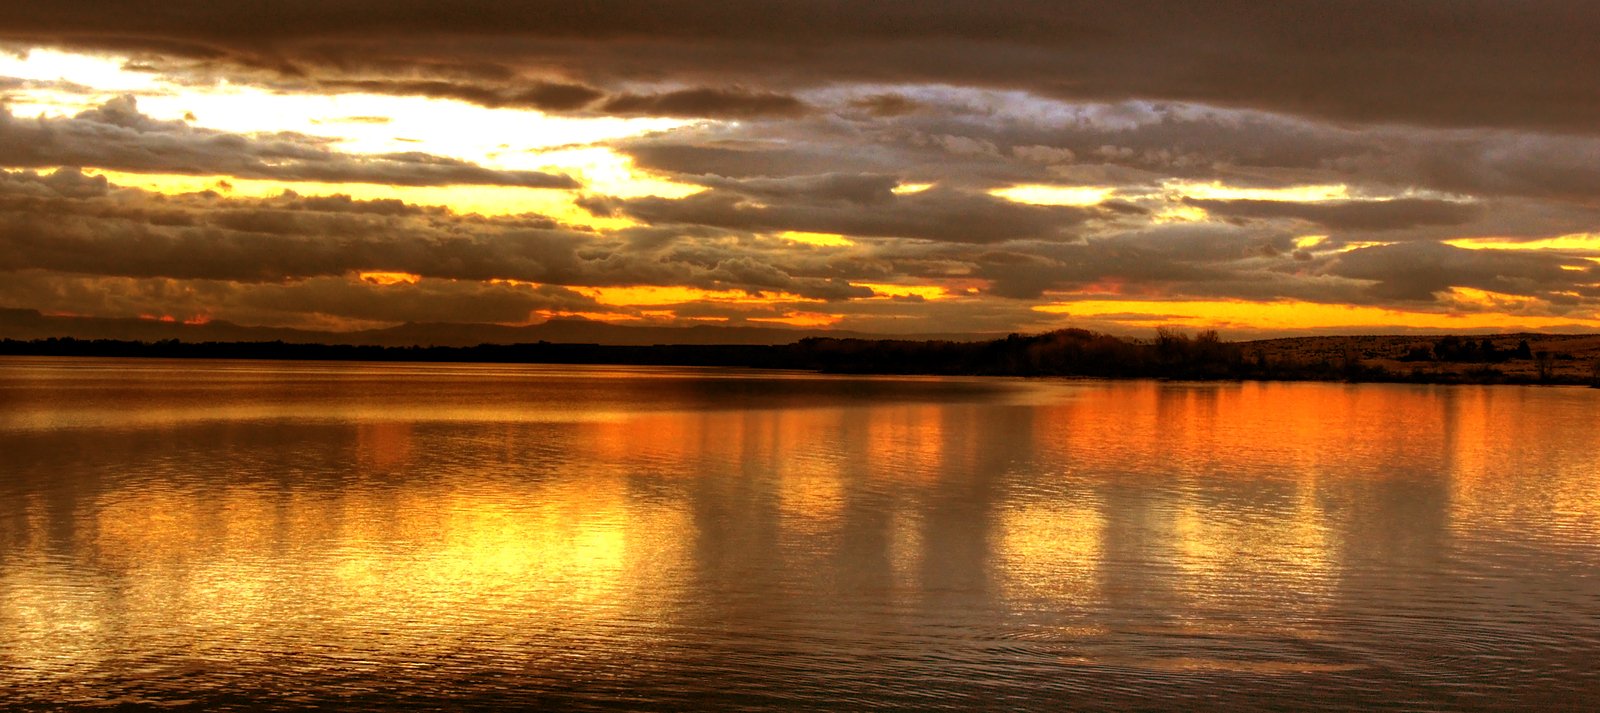 sunset reflected in the water with dark clouds